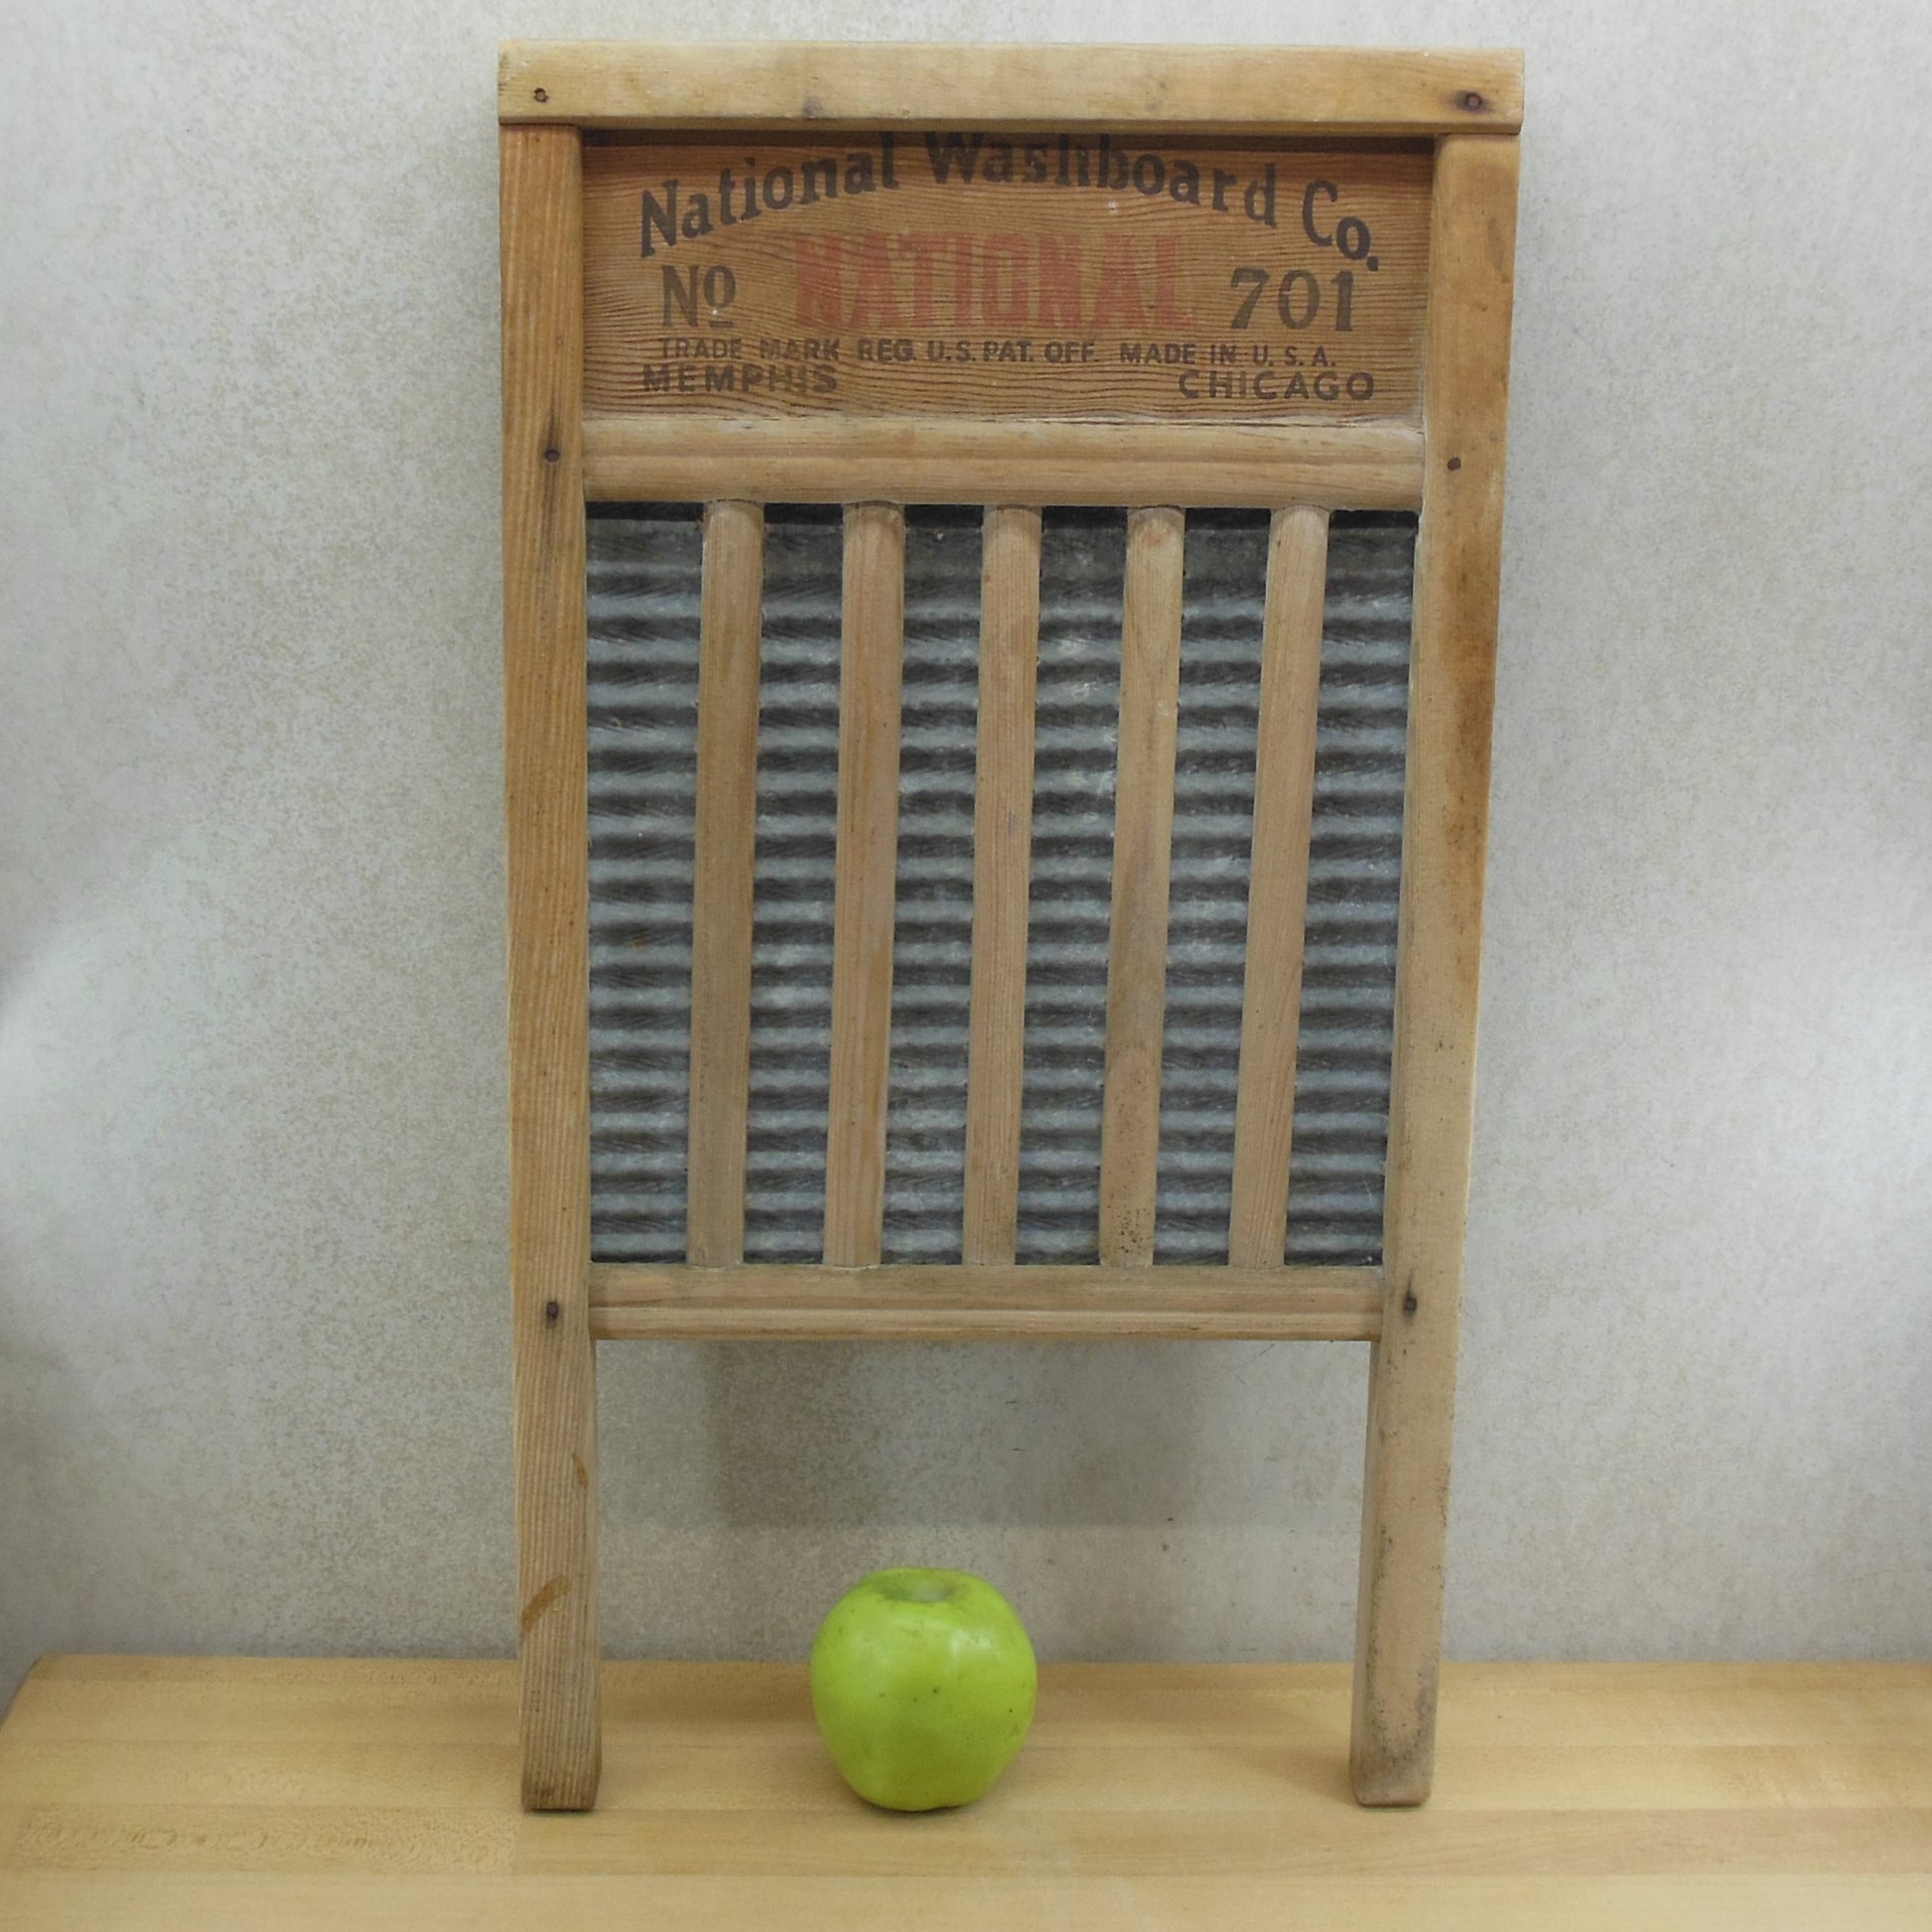 The National Washboard Co. No. 701 The Zinc King